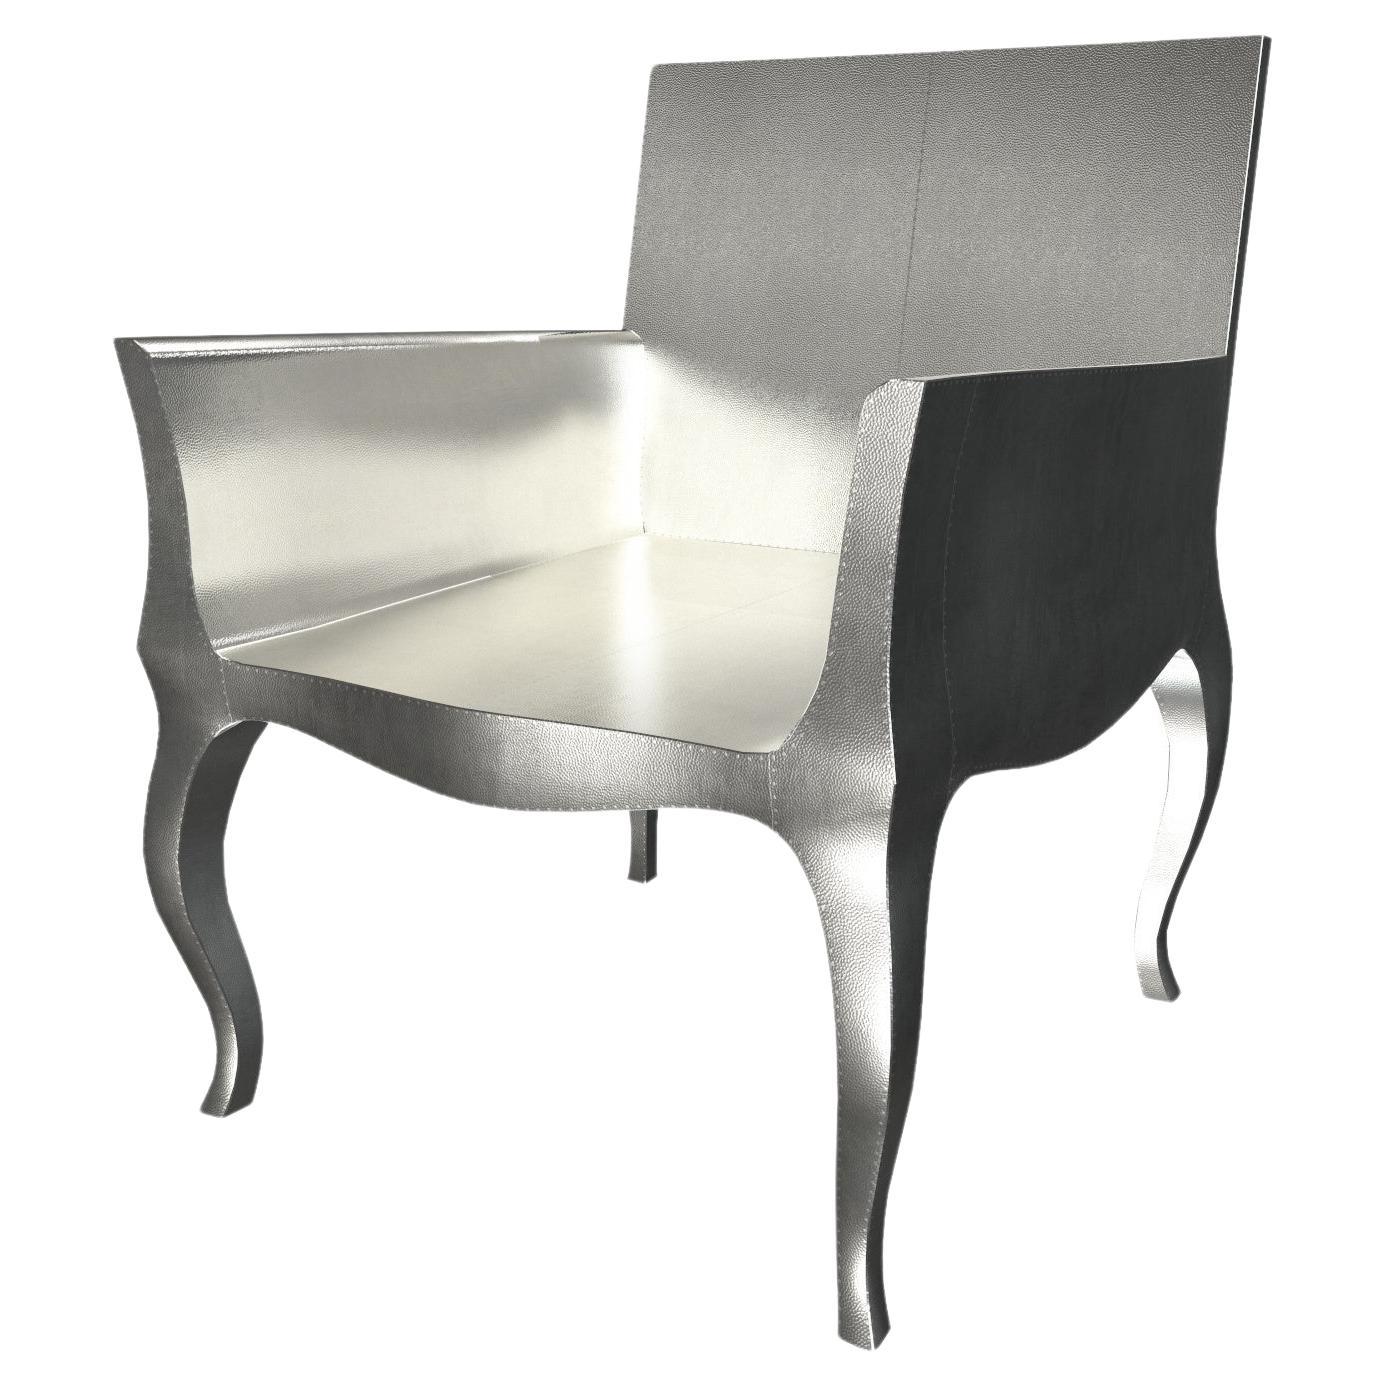 Art Deco Accent Chair Mid Hammered in White Bronze by Paul Mathieu for S.Odegard